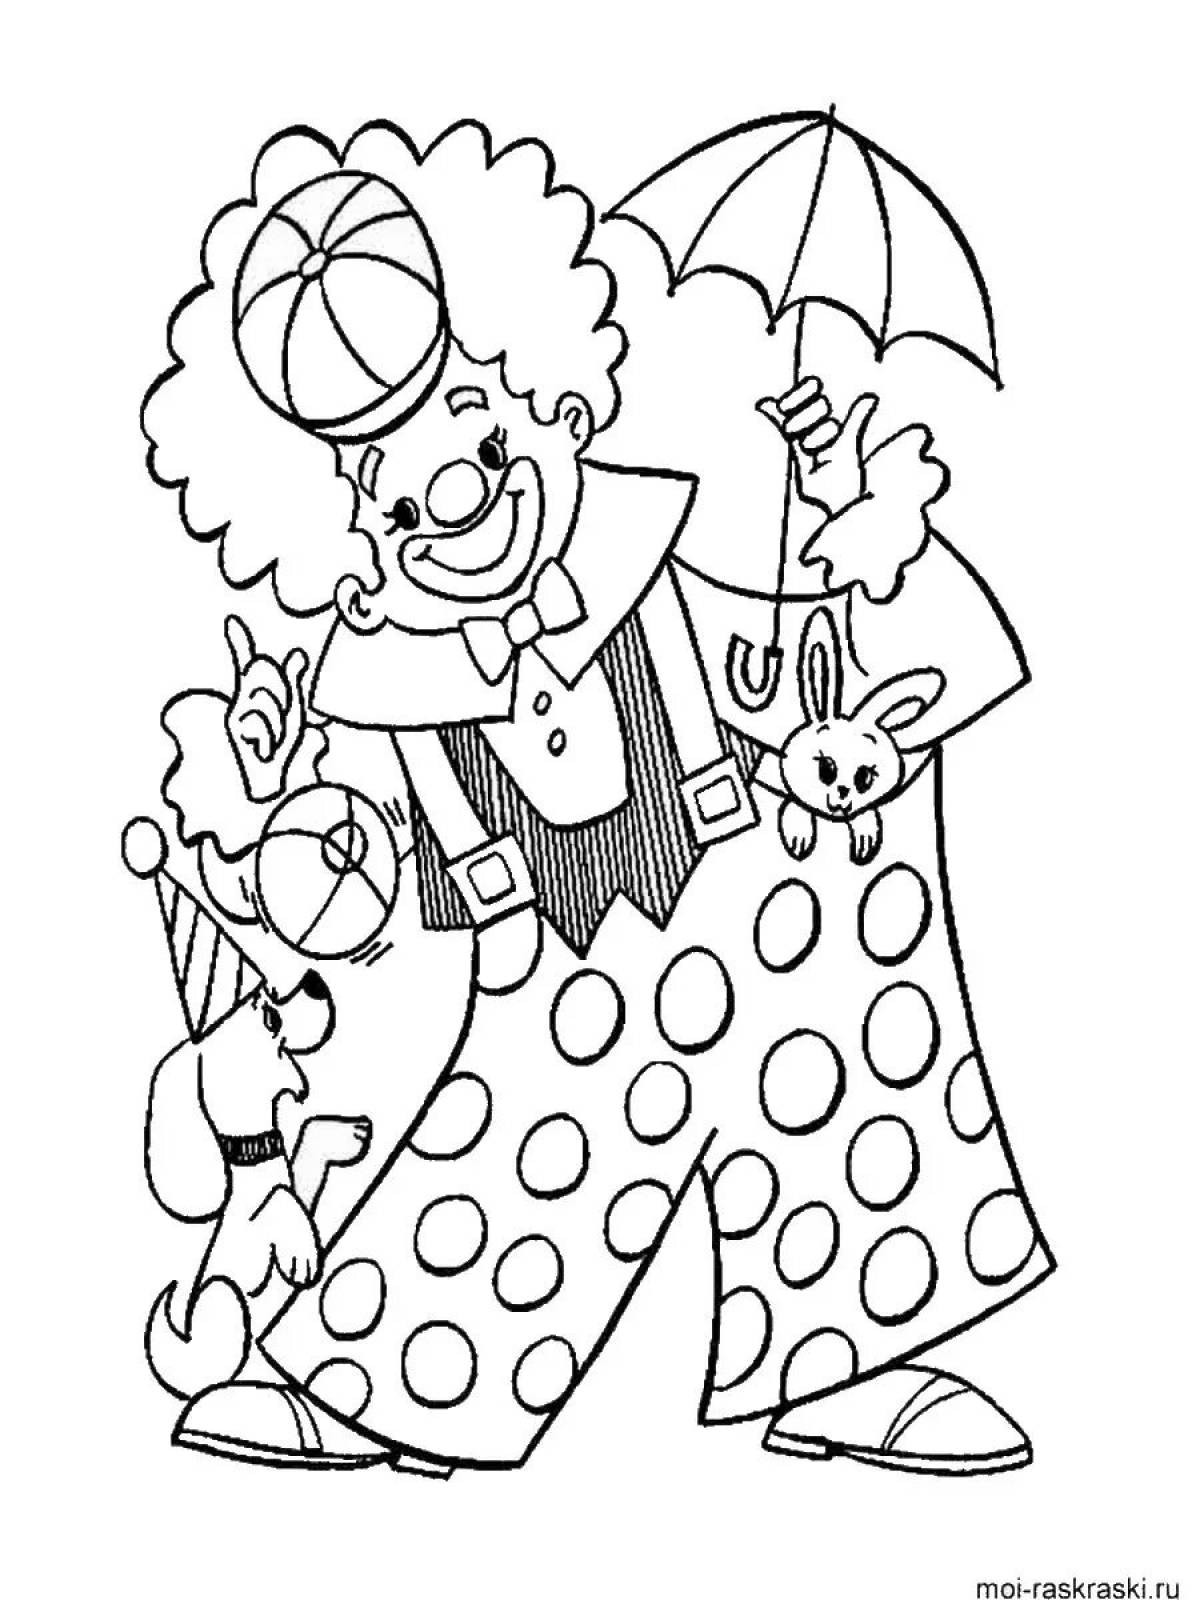 Playful clown coloring page for kids